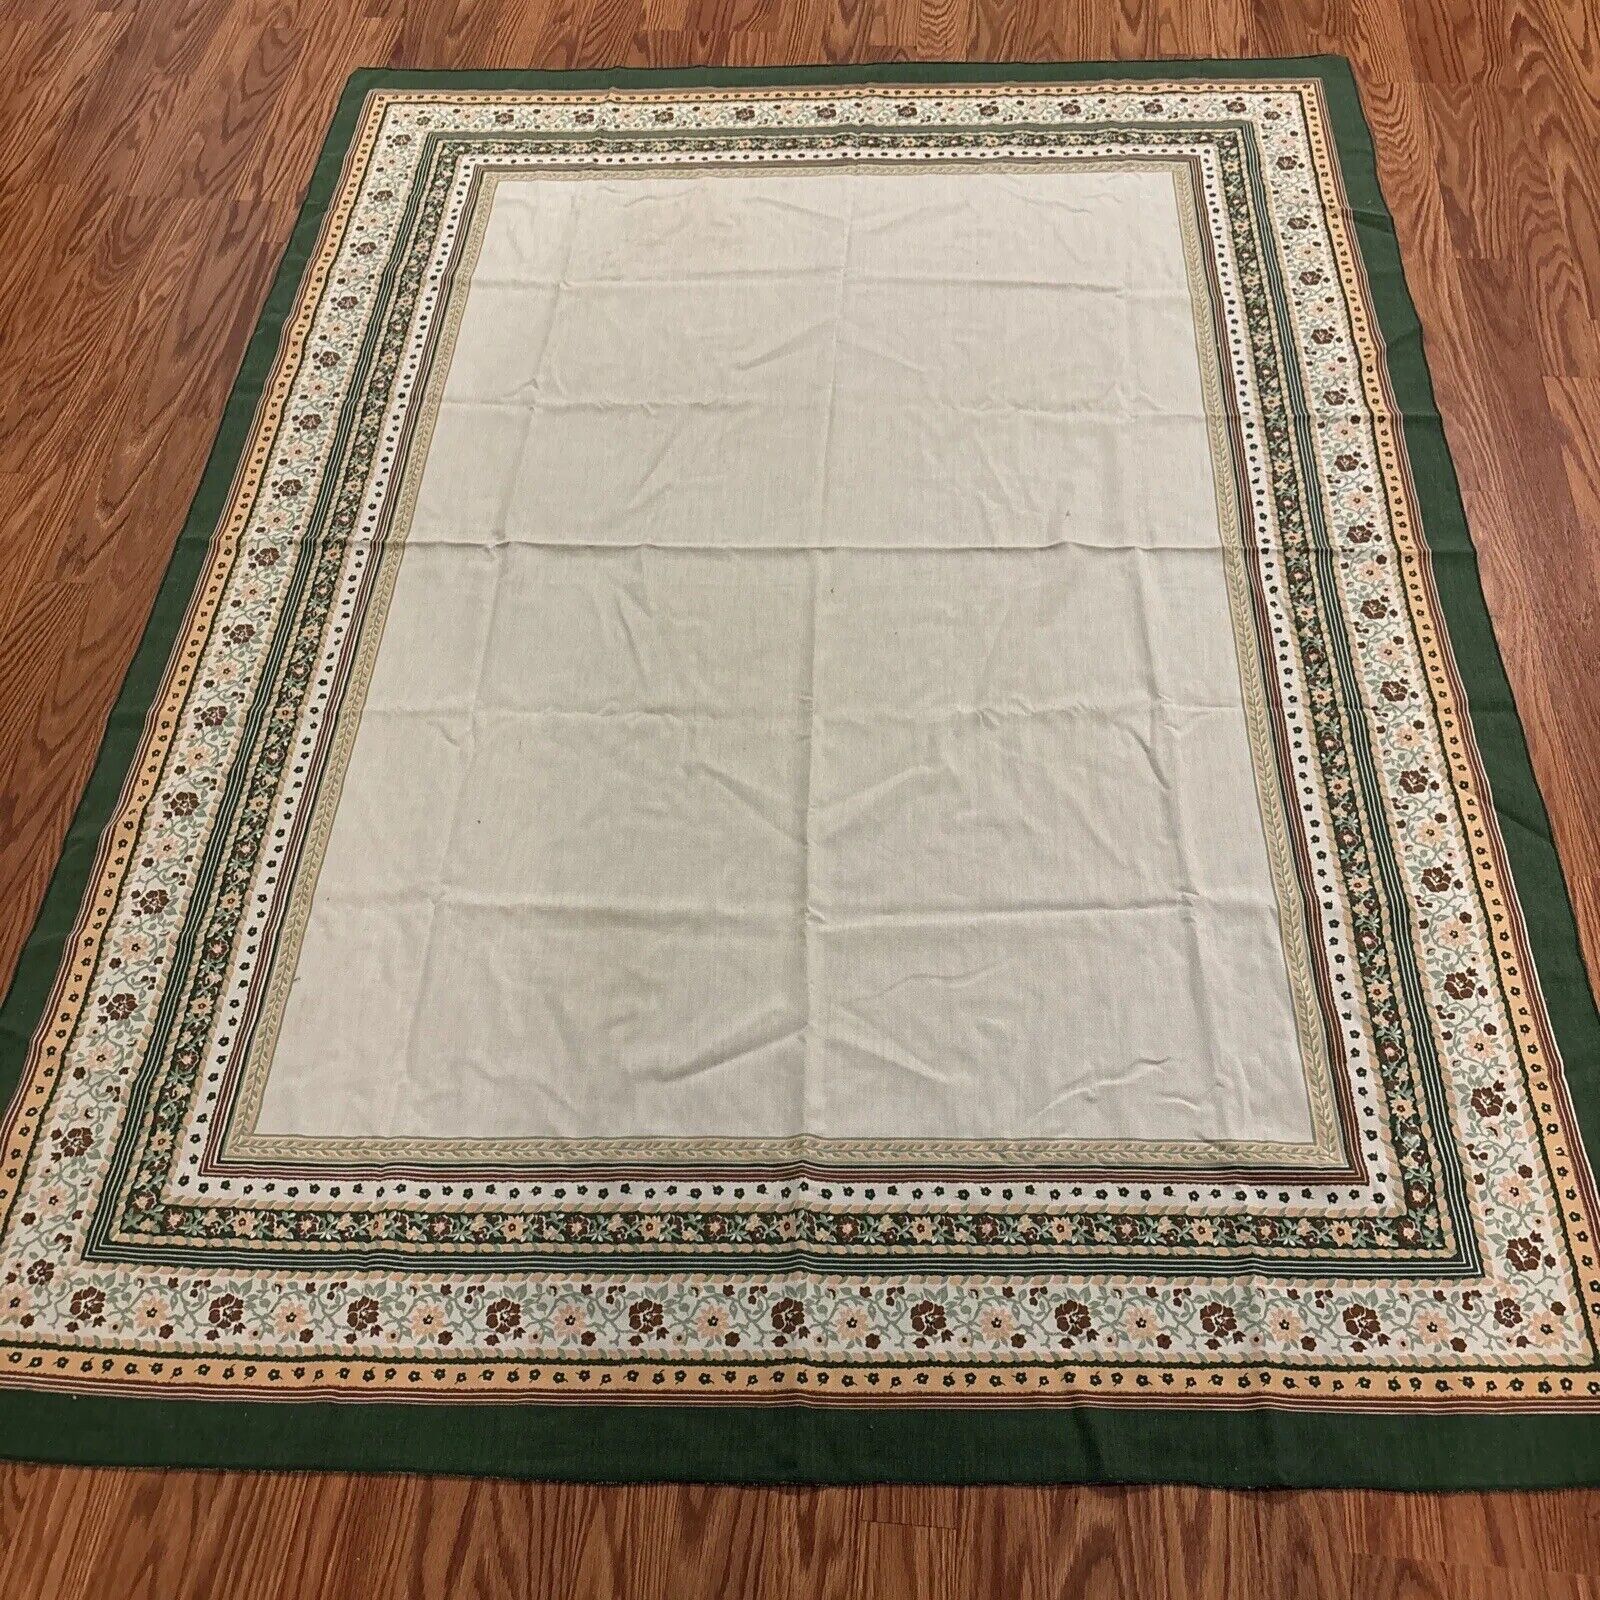 Vintage Cacharel Tablecloth 69” X 51” Green, Gold, Etc. Beige Tablecloth